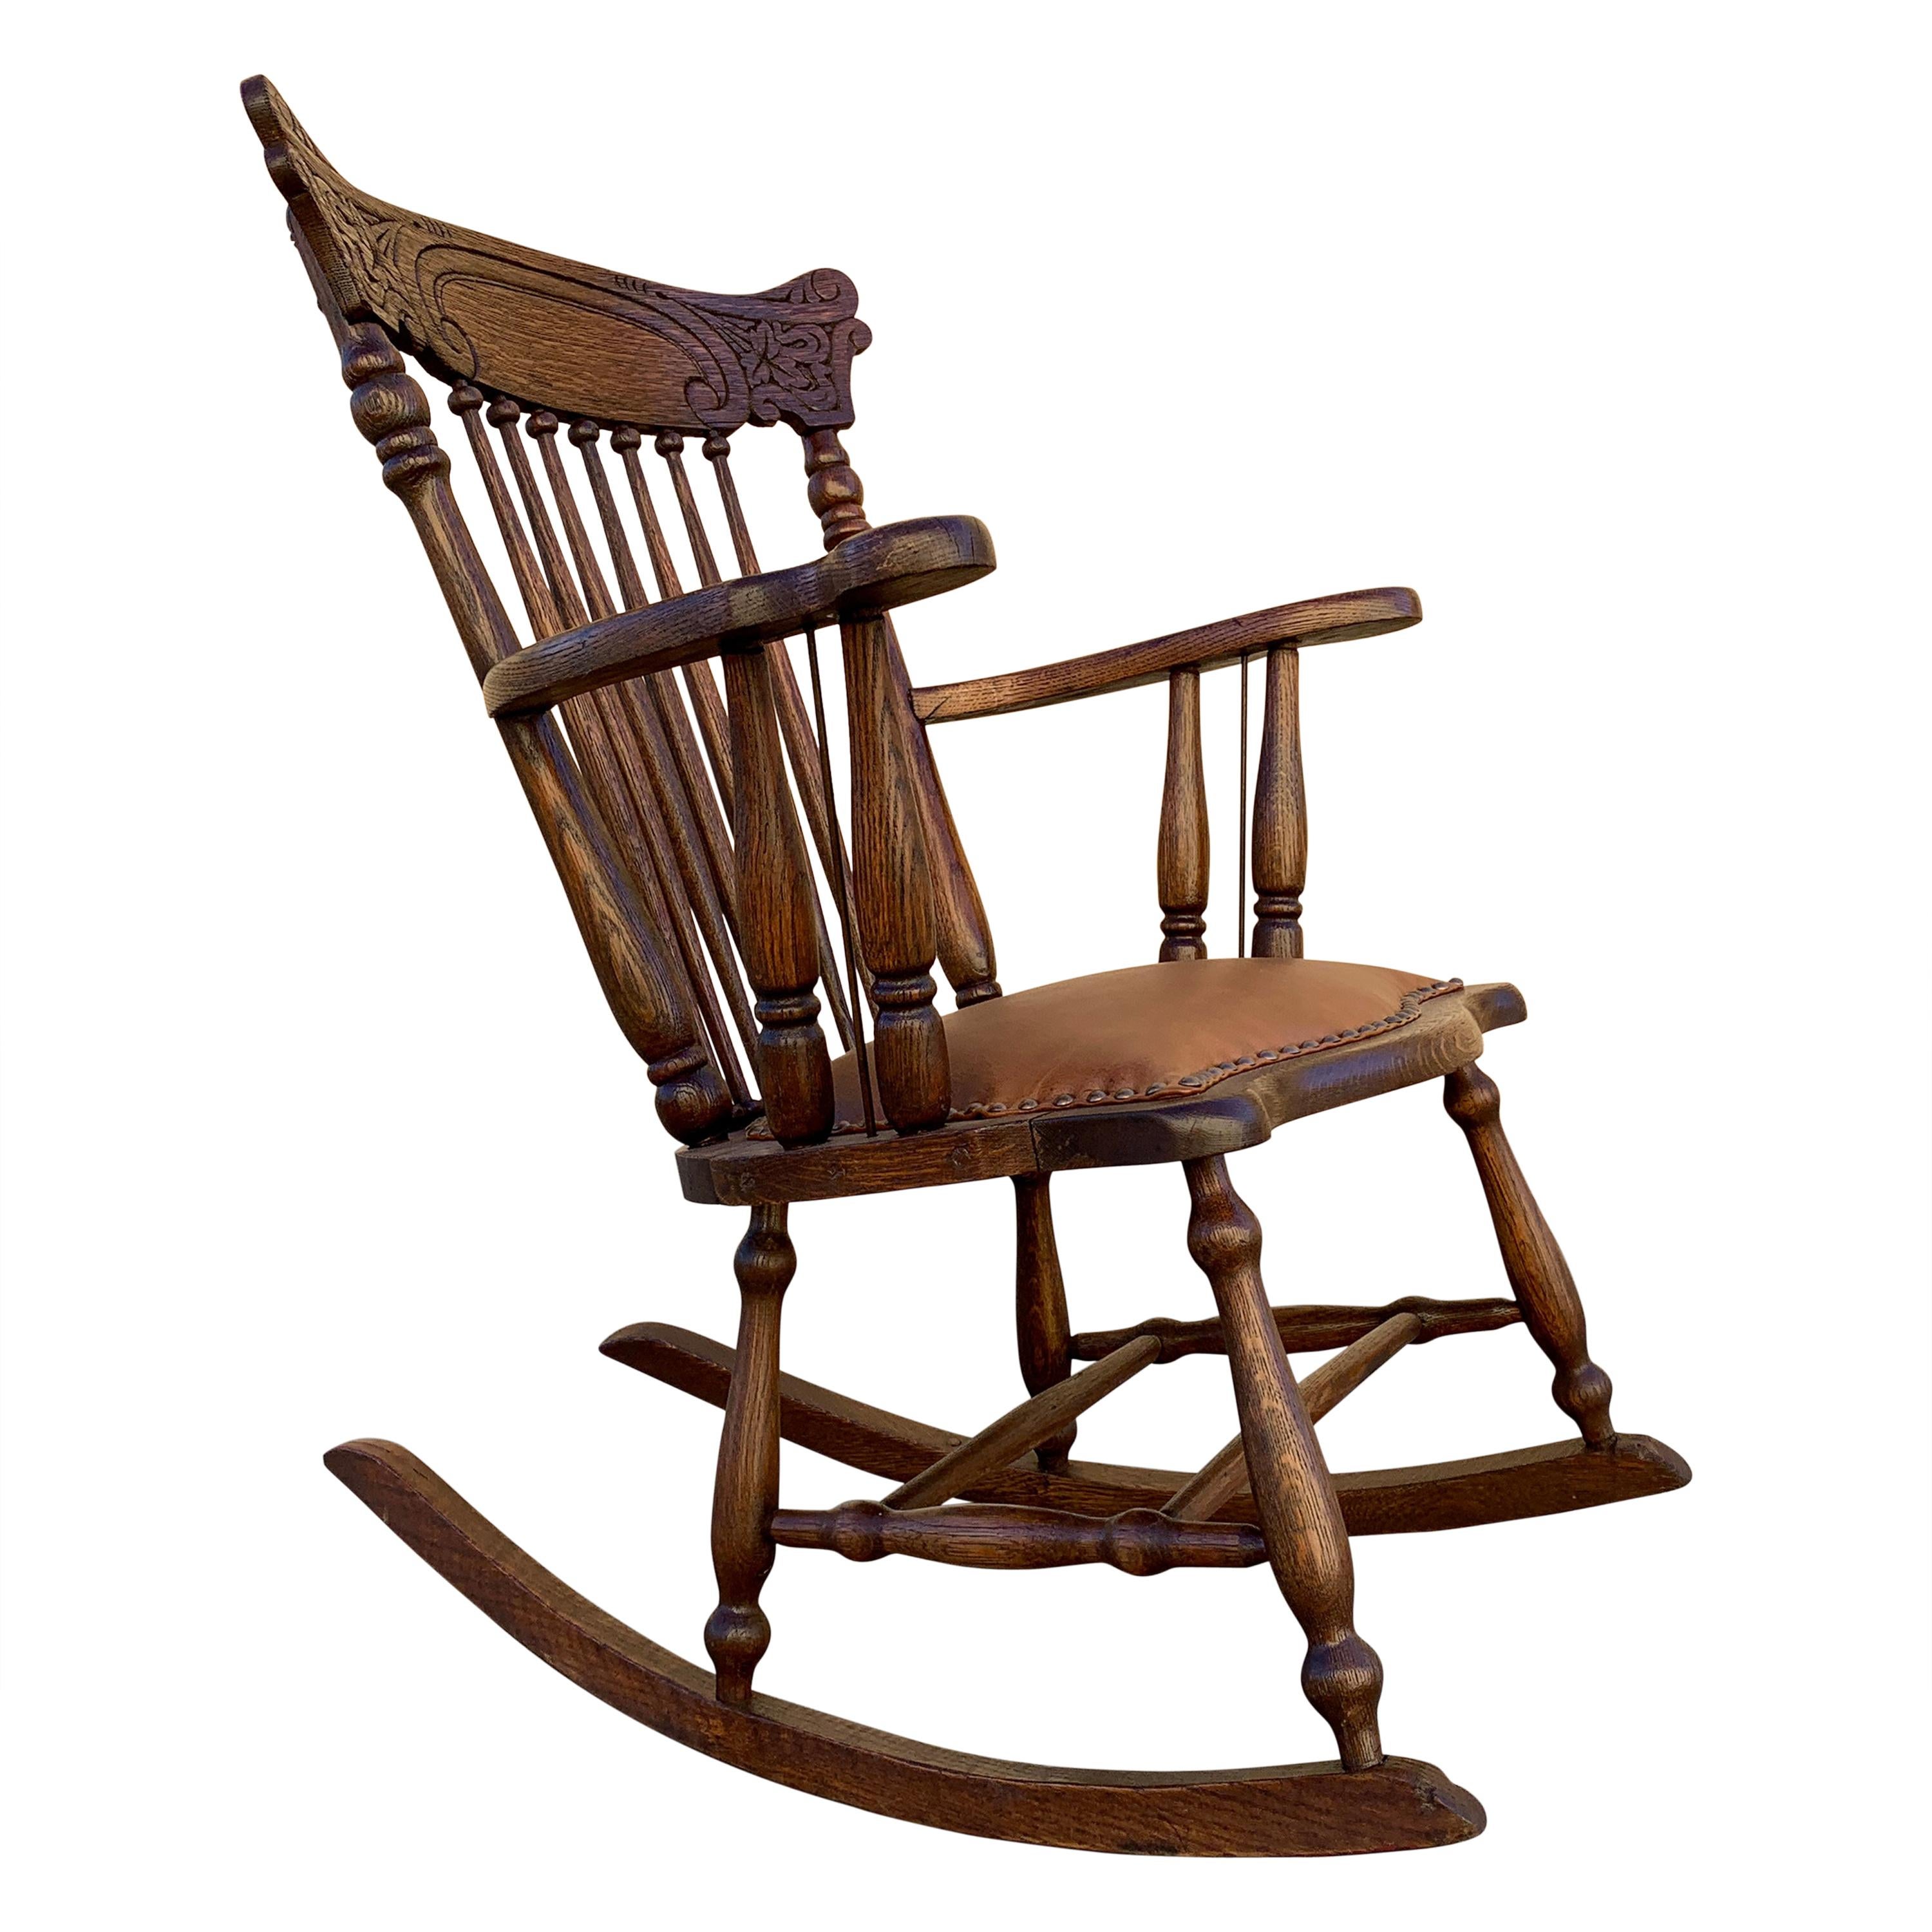 Early 1900s Press Back Rocking Chair with New Leather Seat